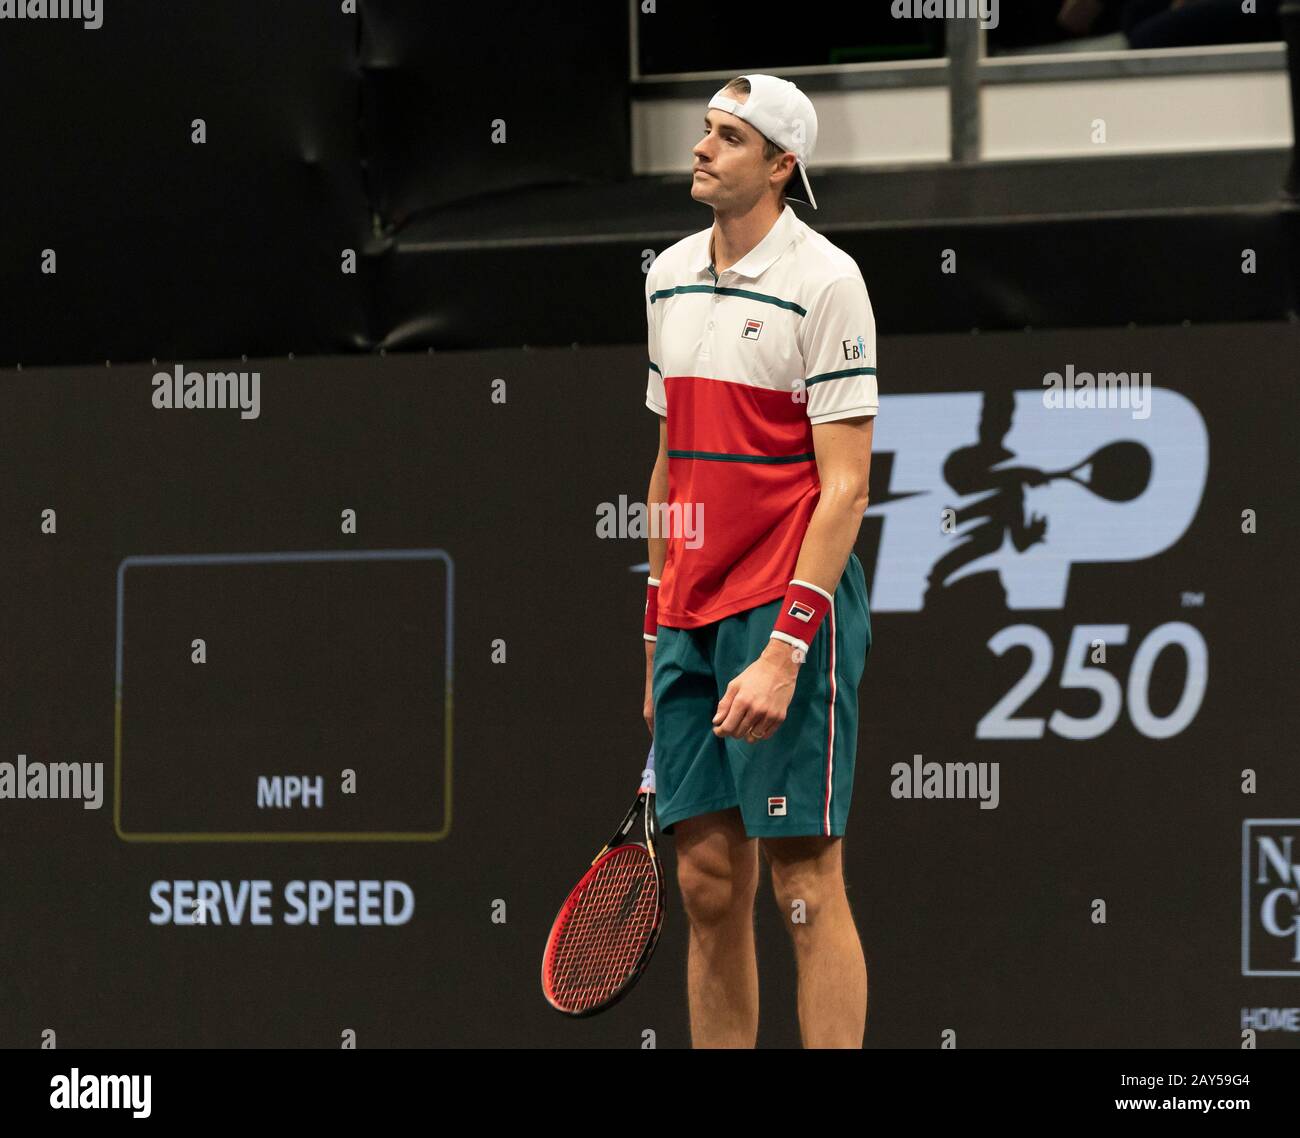 Hempstead, NY - February 13, 2020: John Isner of USA reacts during 2nd  round match against Jordan